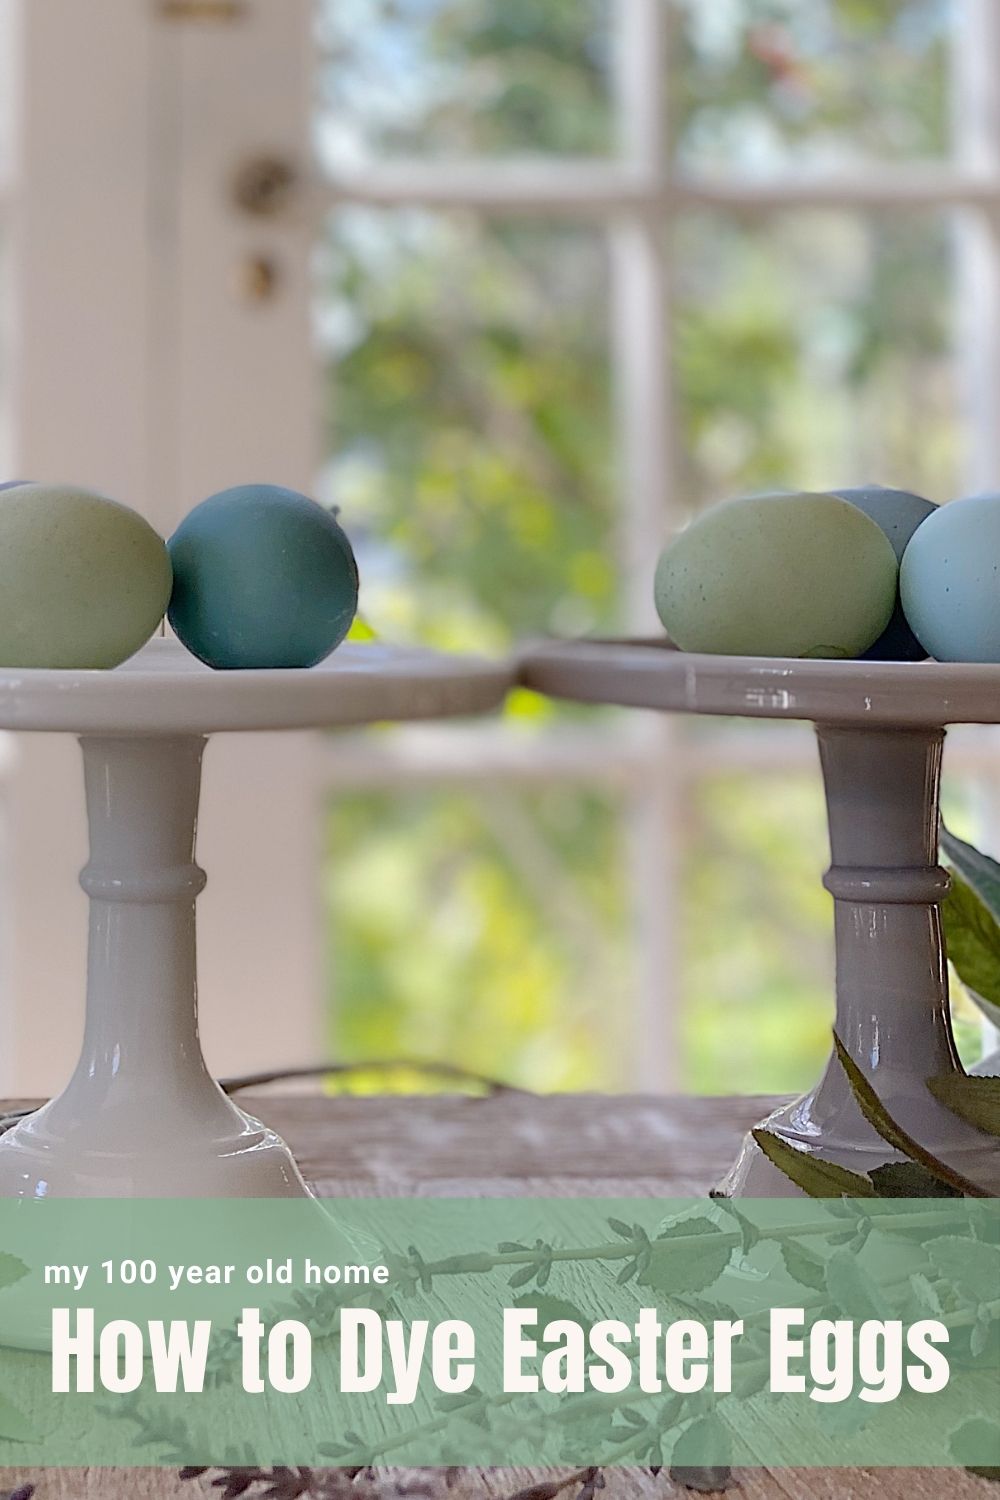 I have always loved Araucana chicken eggs ever since Martha Stewart shared them in her magazine. Today I shared how to dye Easter eggs in the same beautiful chicken egg colors.